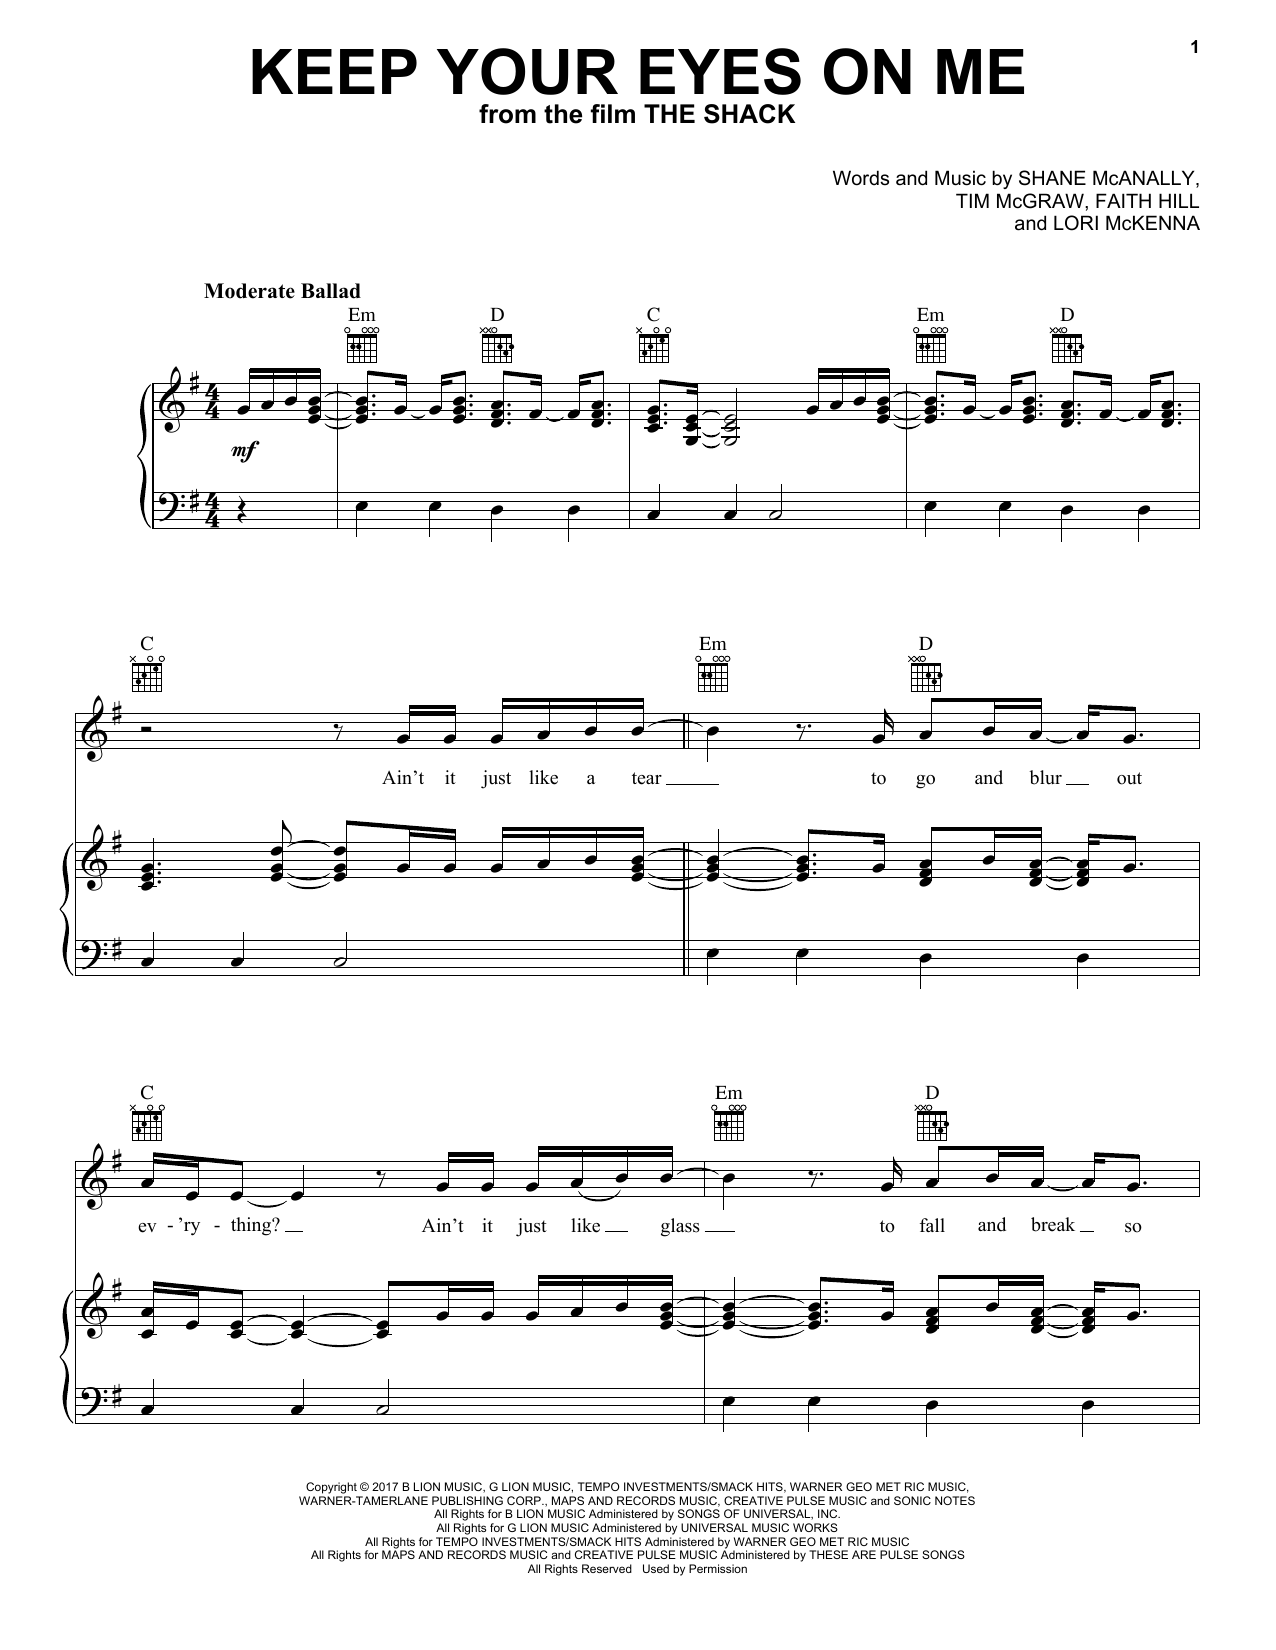 Download Tim McGraw and Faith Hill Keep Your Eyes On Me (from The Shack) Sheet Music